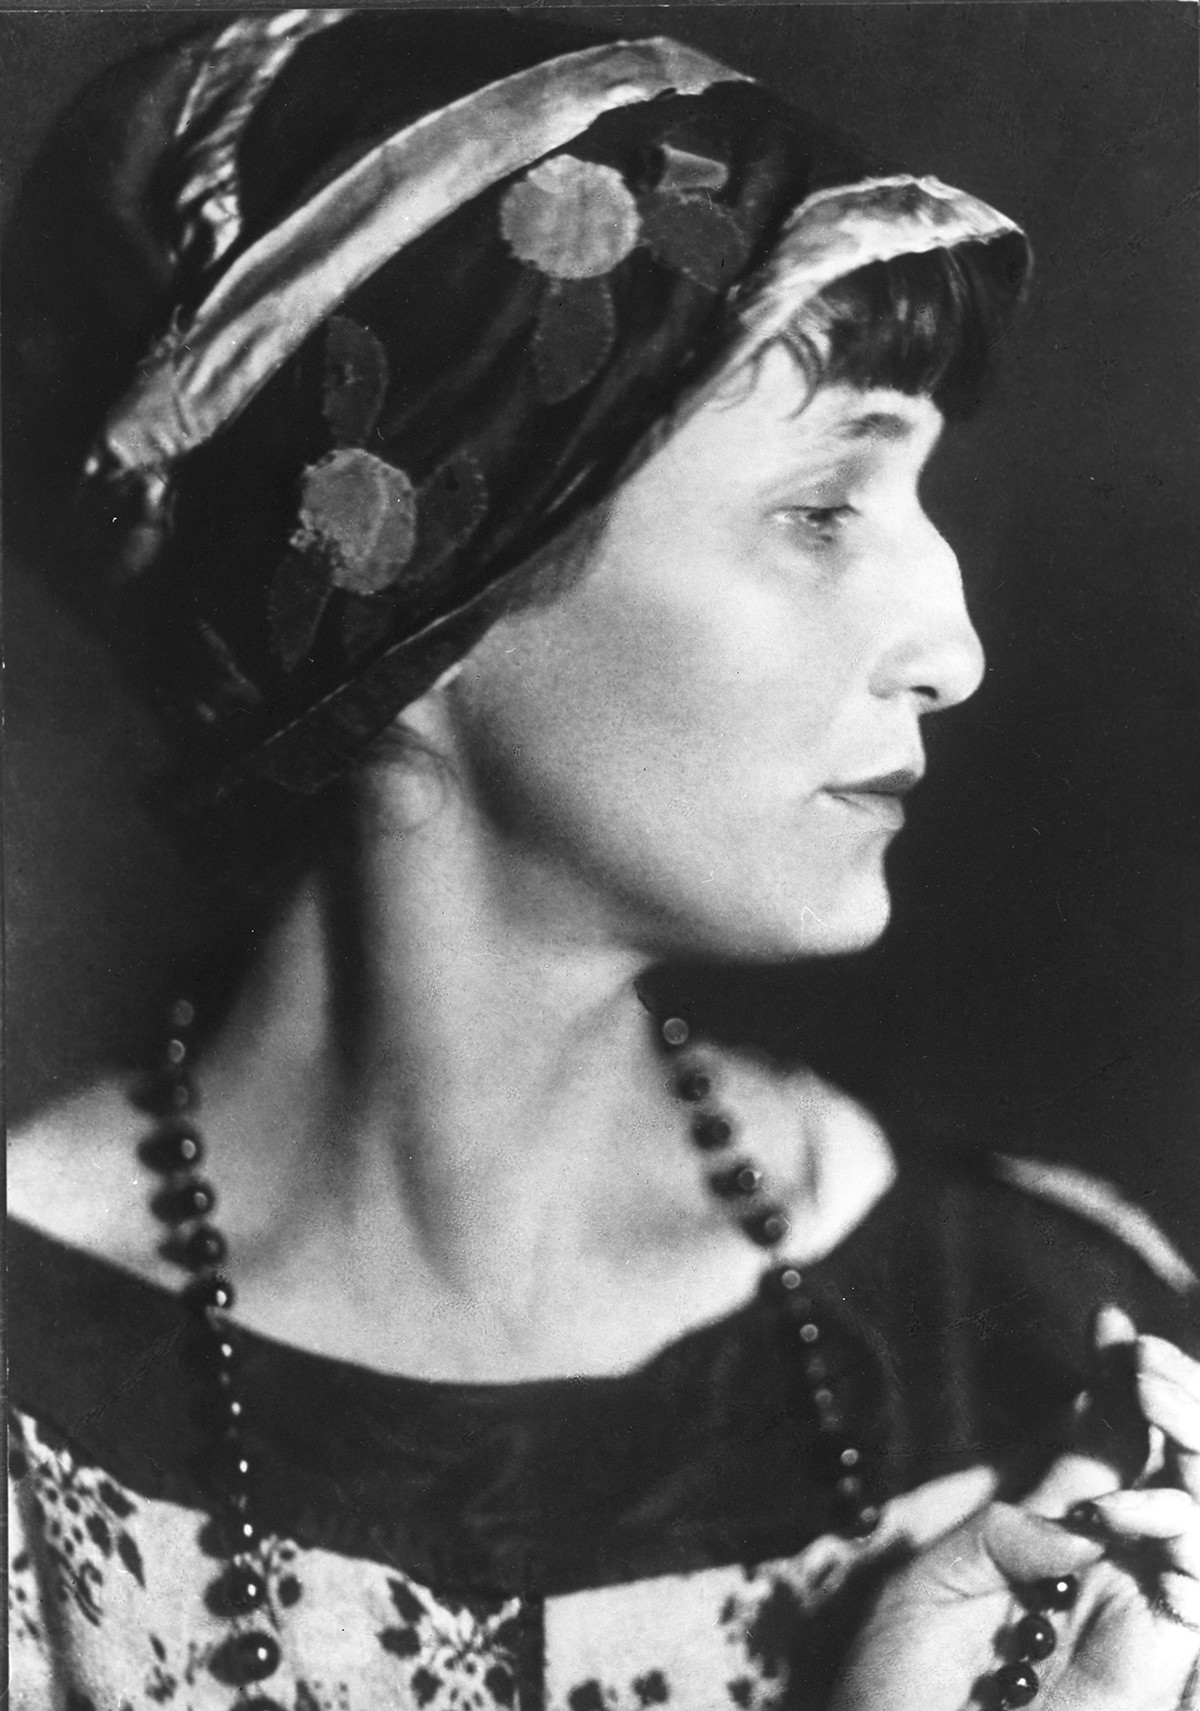 Her famous ‘Requiem’ poem made Akhmatova the rare voice for the downtrodden.